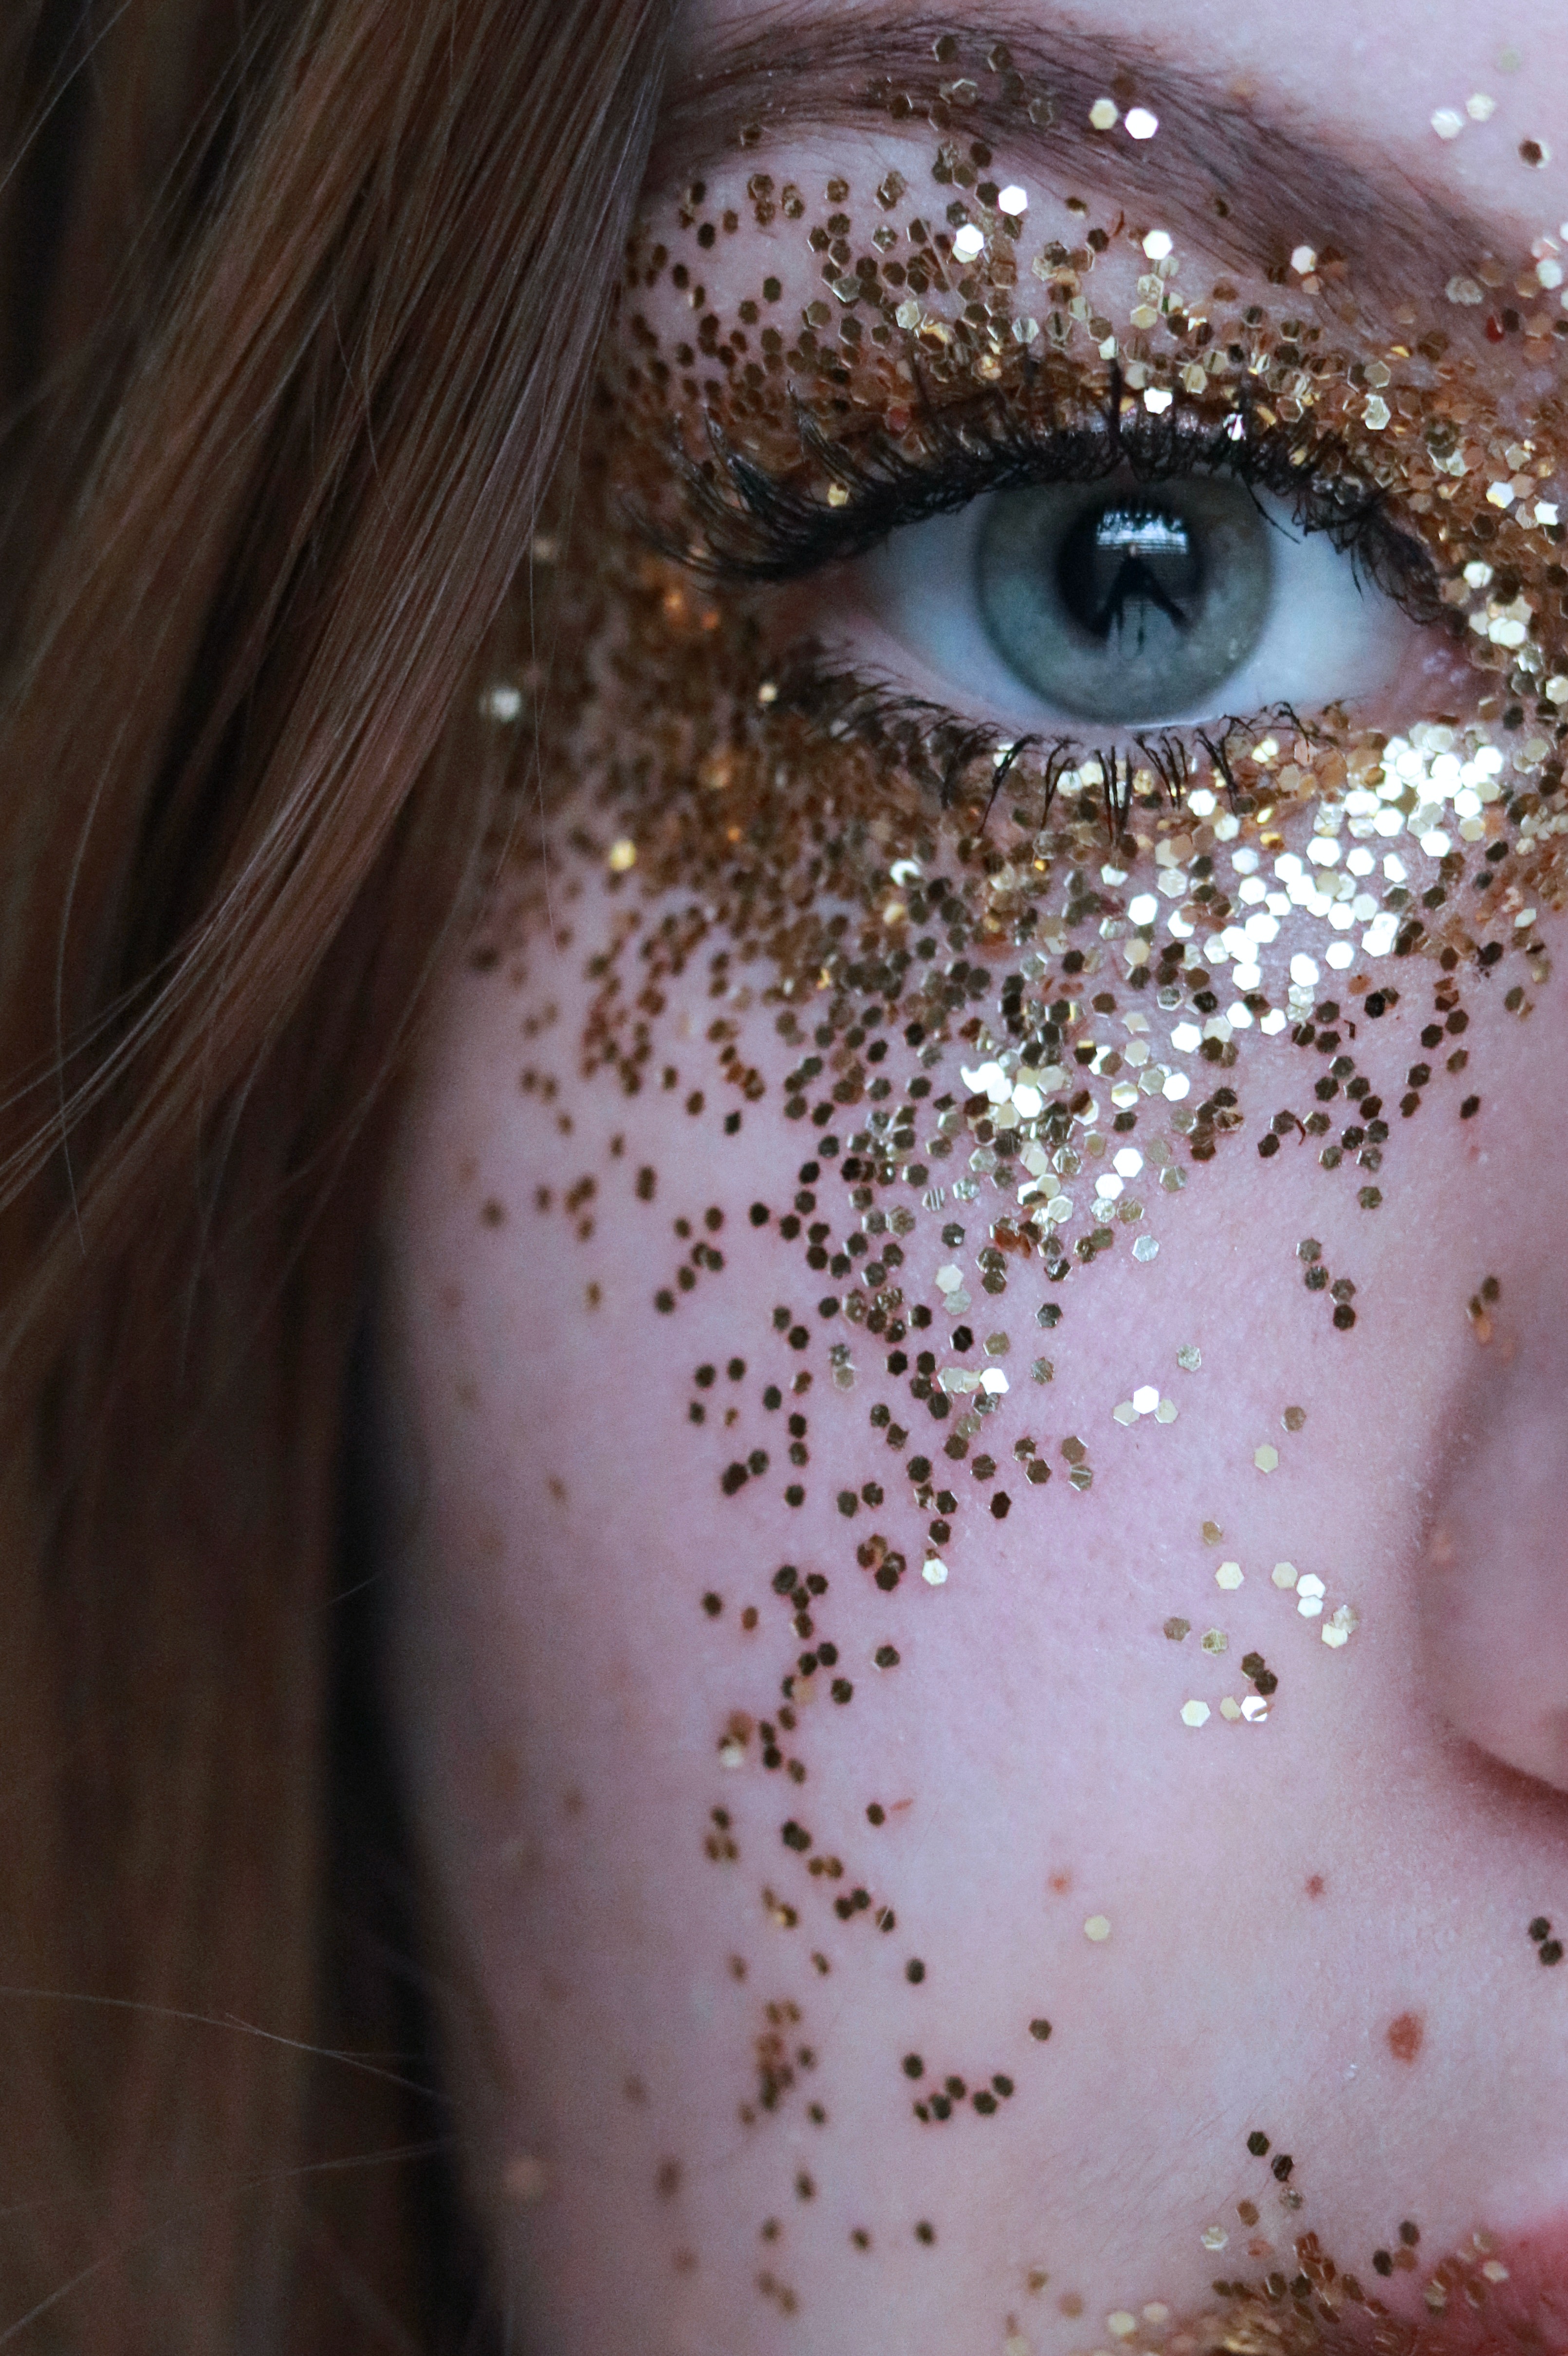 An eye with glitter surrounding it.  | Source: Pexels